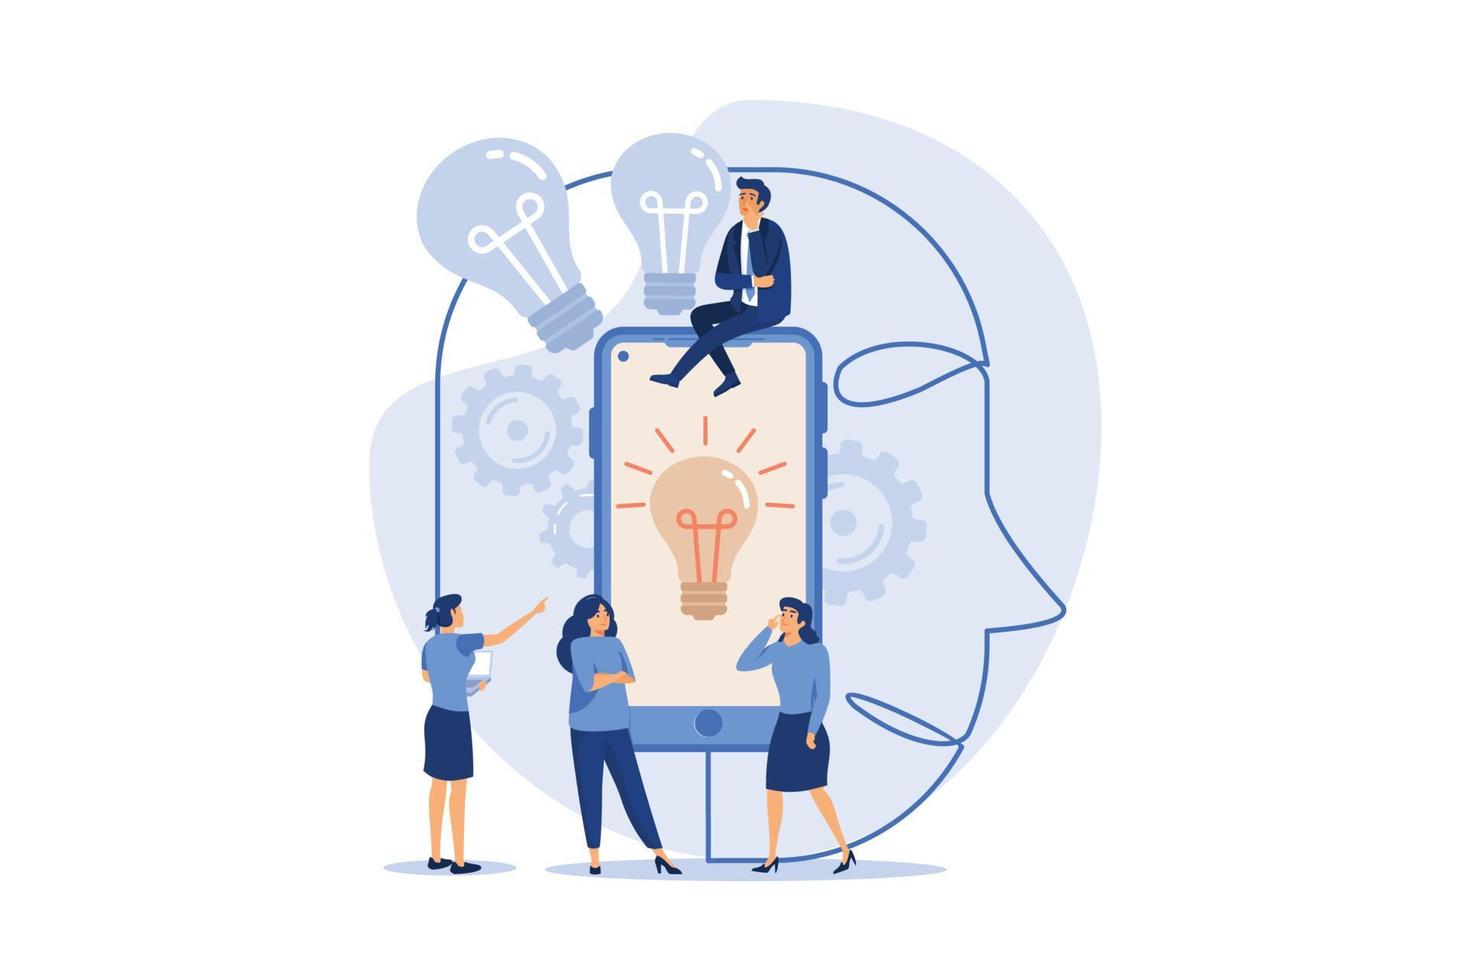 the company is engaged in a joint search for ideas, an abstract human head filled with ideas of thought and analytics. flat design modern illustration vector